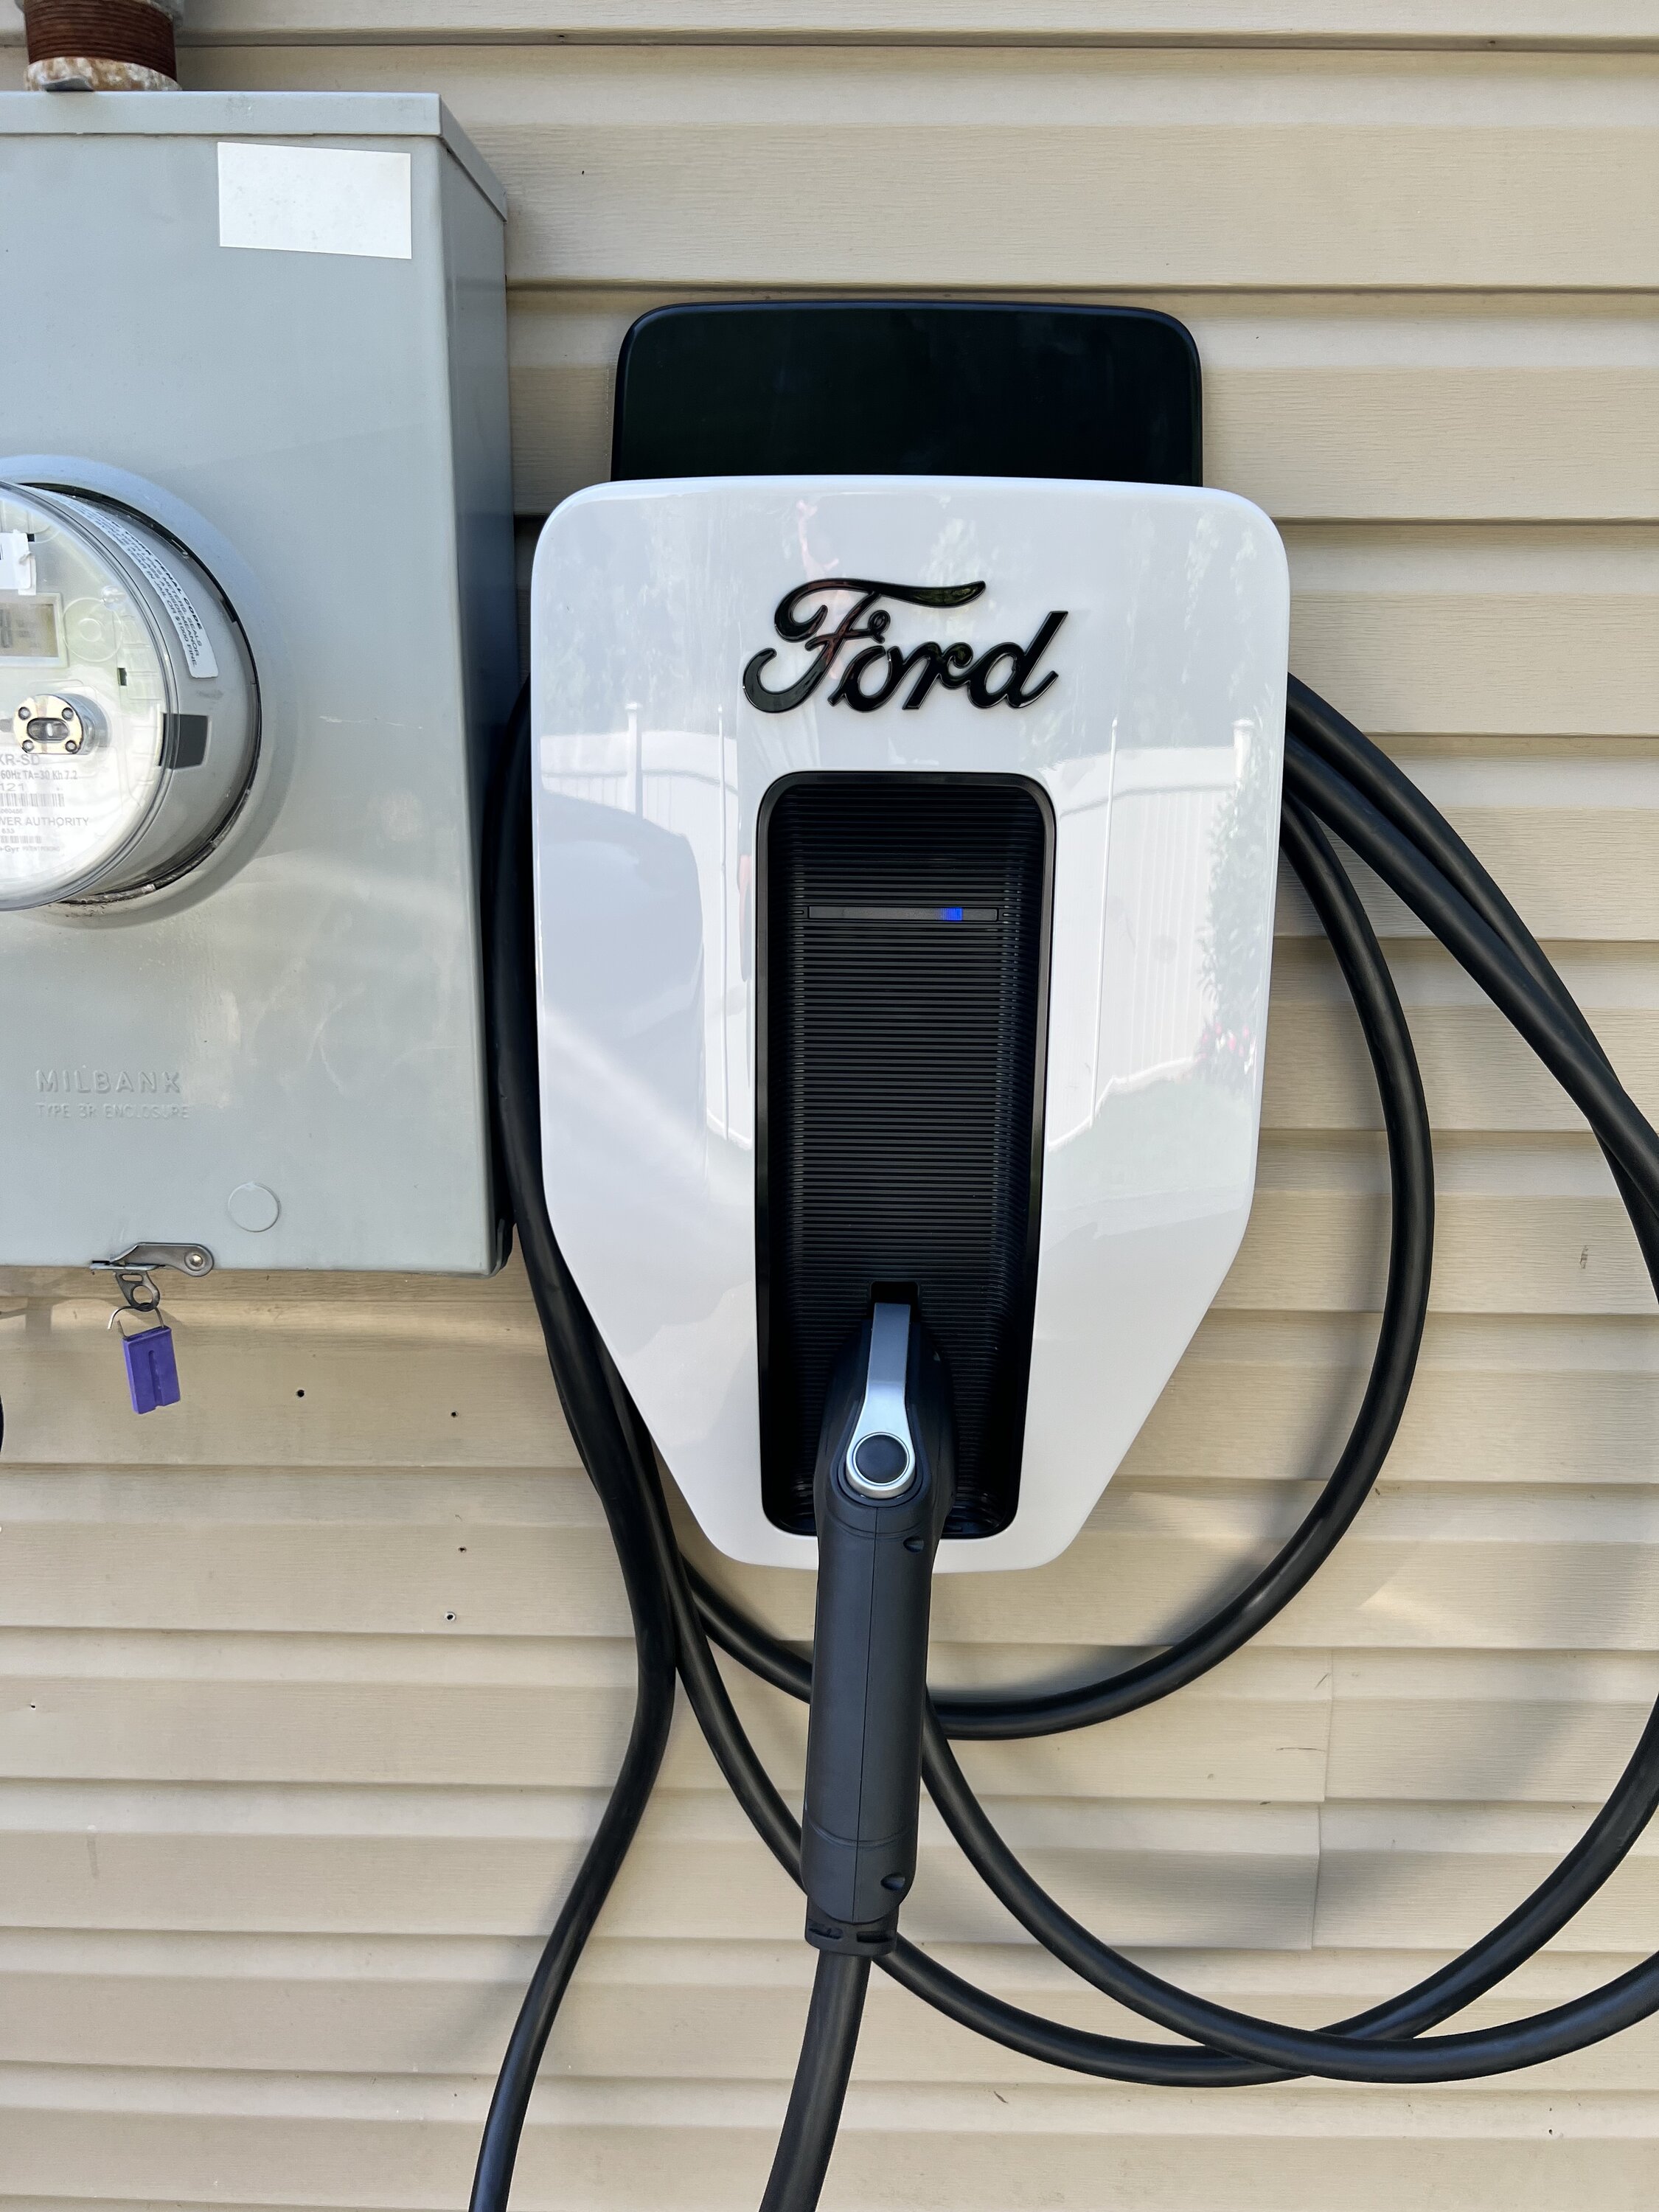 Ford F-150 Lightning Should I Install Charge Station Pro inside or outside ? 3CE55B79-98DF-46F2-A417-A47B2002275B